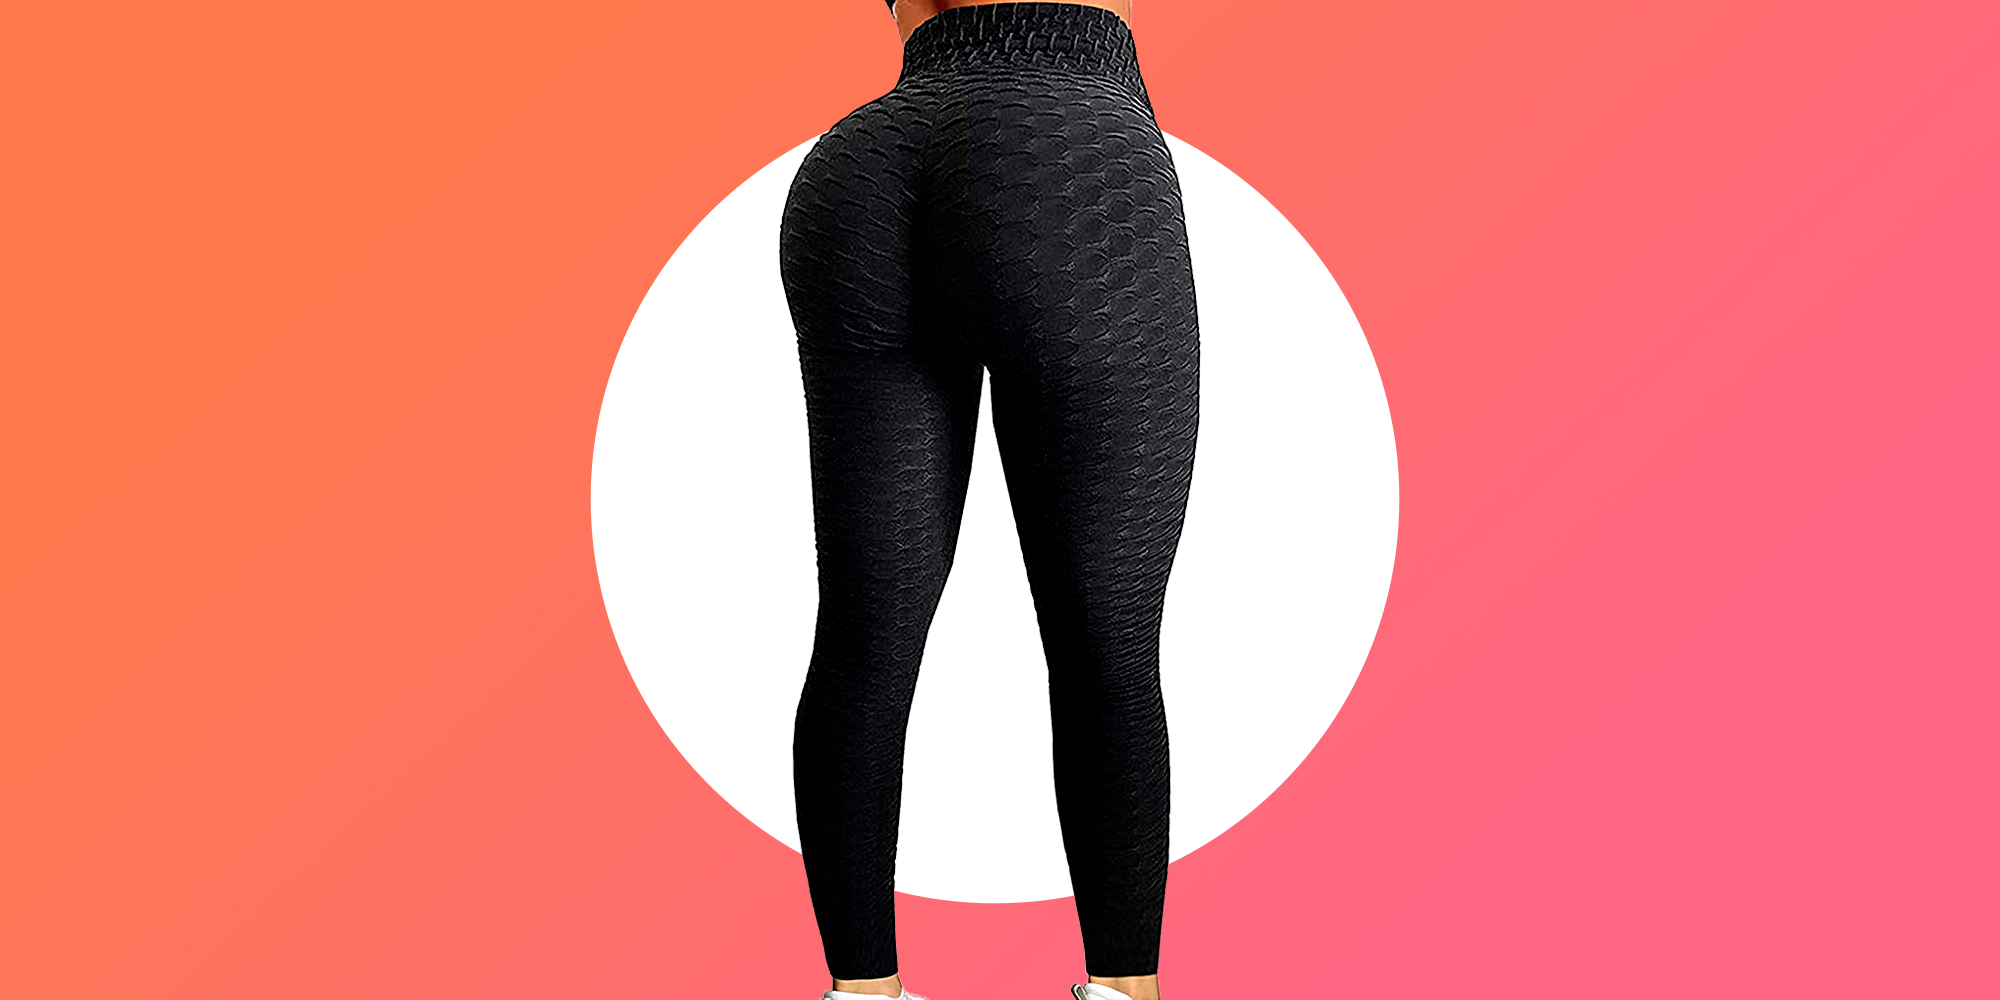 Seasum Booty Lifting Leggings Are a Hit With Over 54,000 Shoppers